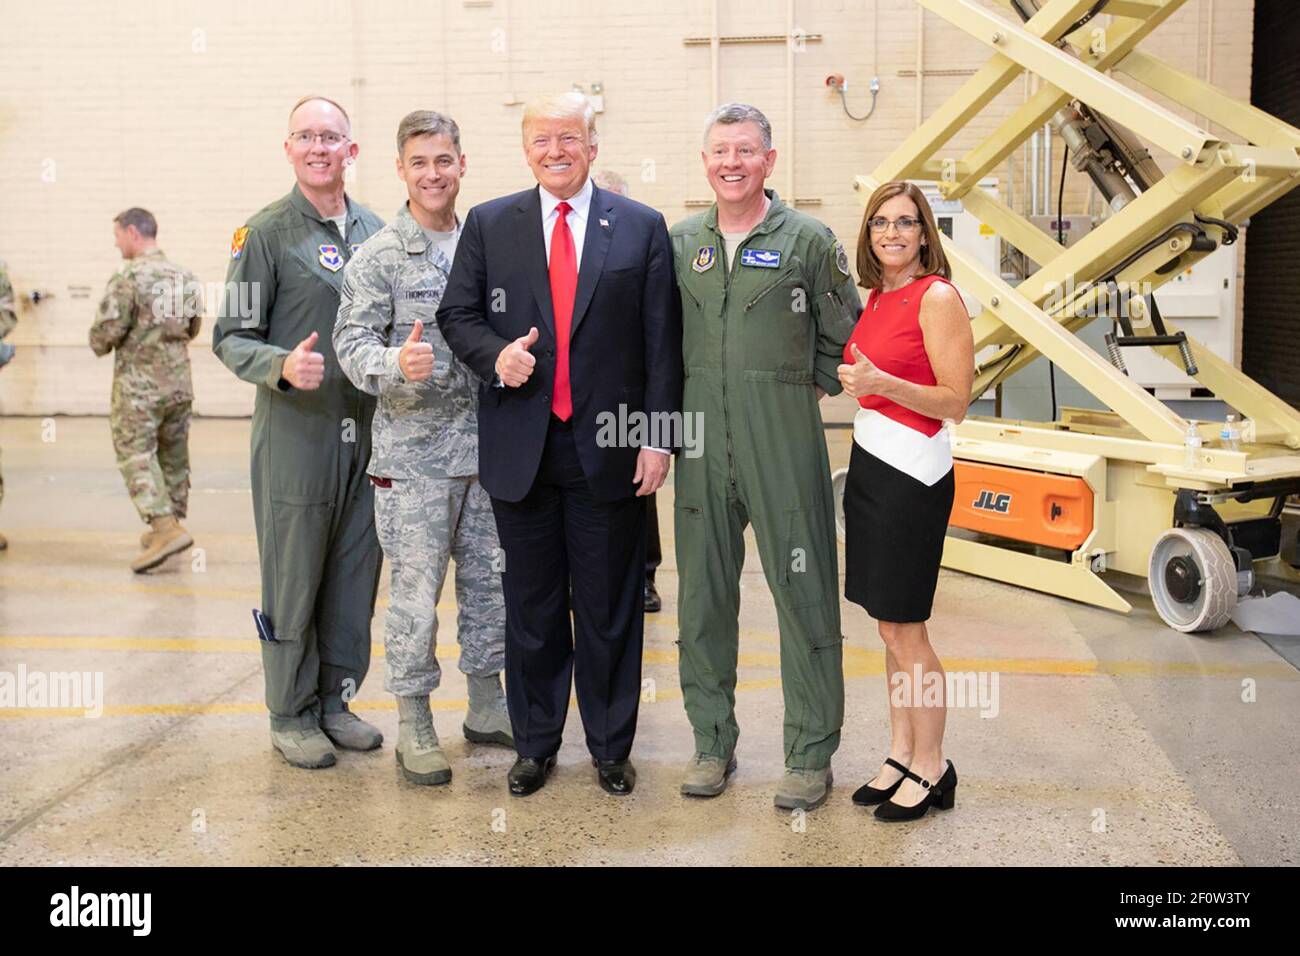 President Donald Trump poses for a photo with Brig. Gen. Todd Canterbury Chief Master Sgt. Ronald Thompson Col. Bryan Cook and U.S. Rep. Martha McSally R-Ariz. after participating in a defense capability tour Friday Oct. 19 2018 at Luke Air Force Base Ariz. Stock Photo